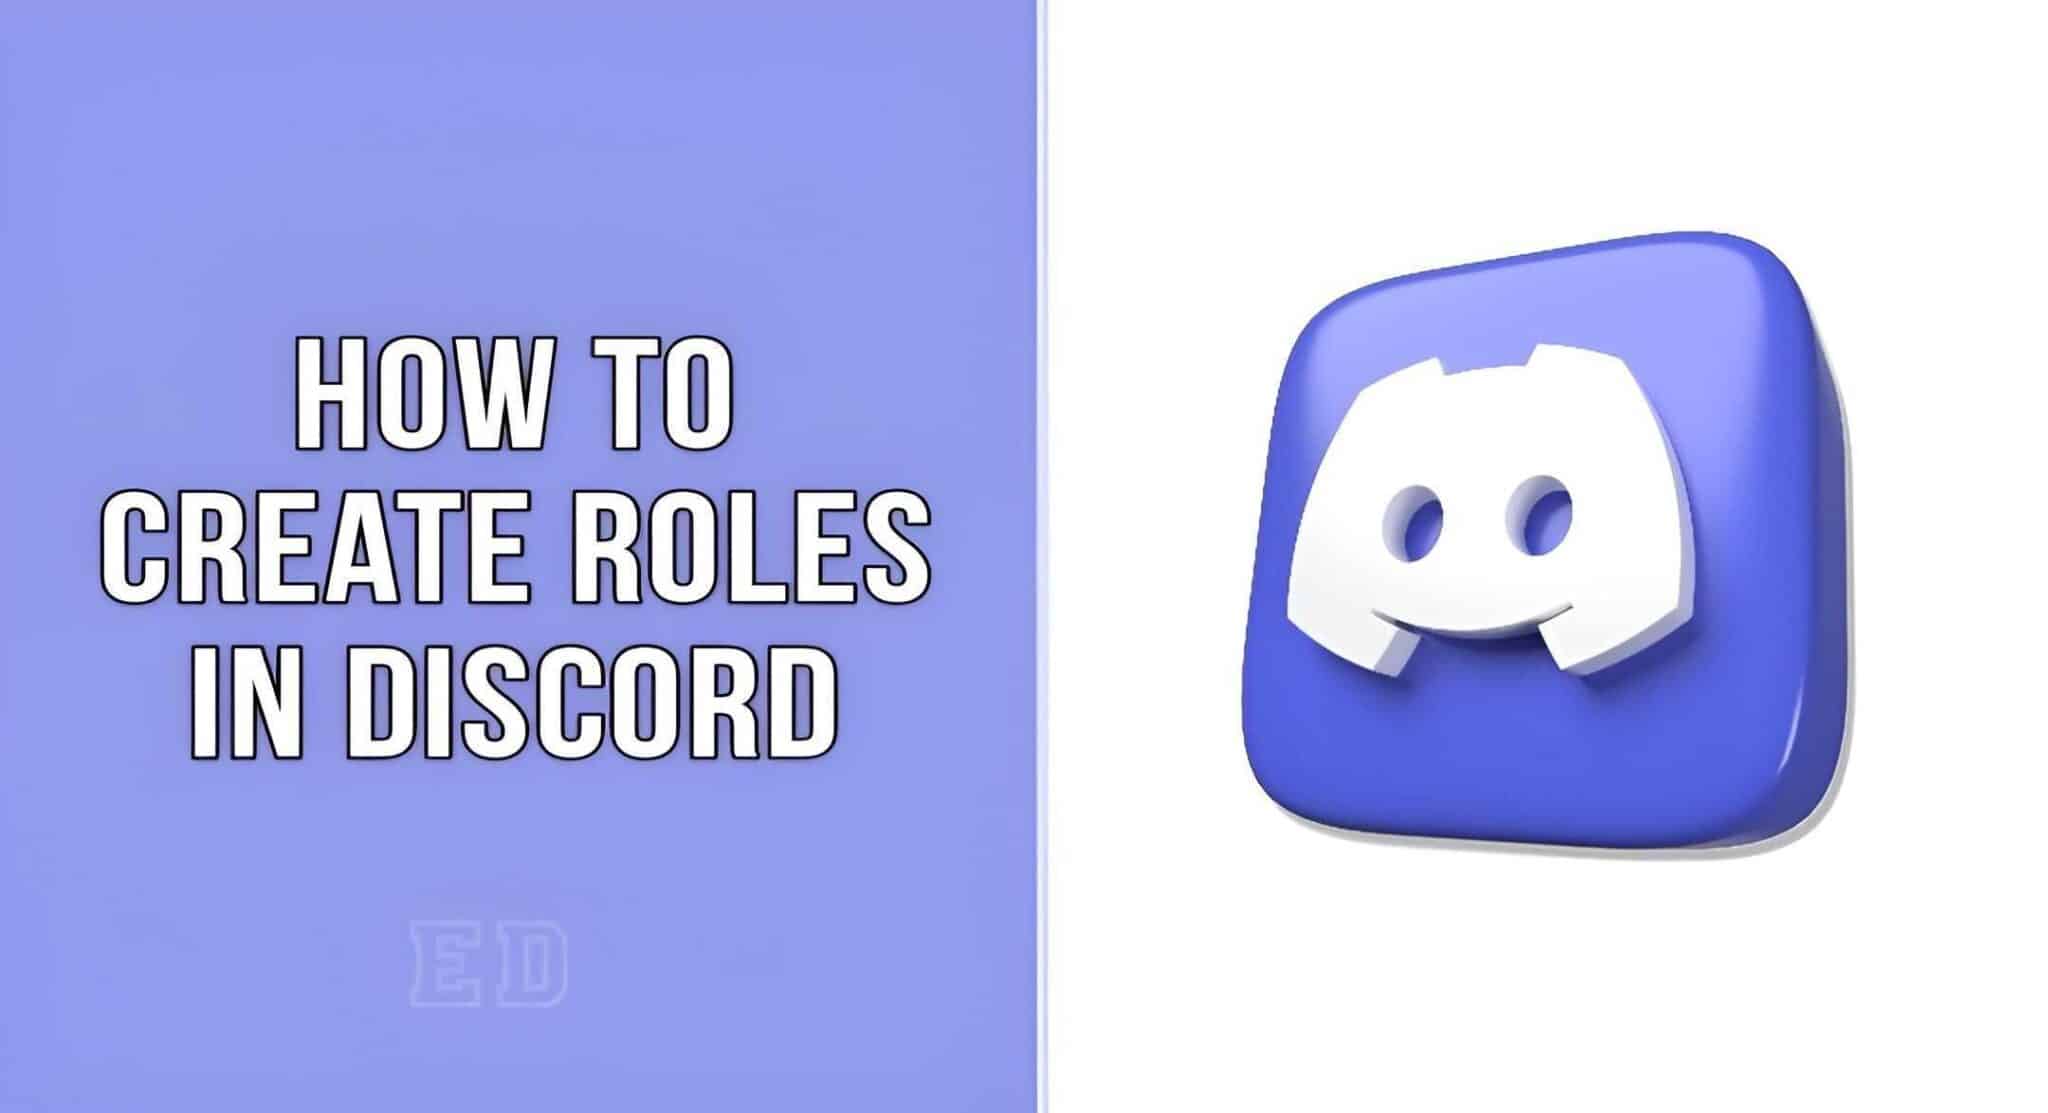 How to Create Roles in Discord? [Step-By-Step Image Guide]